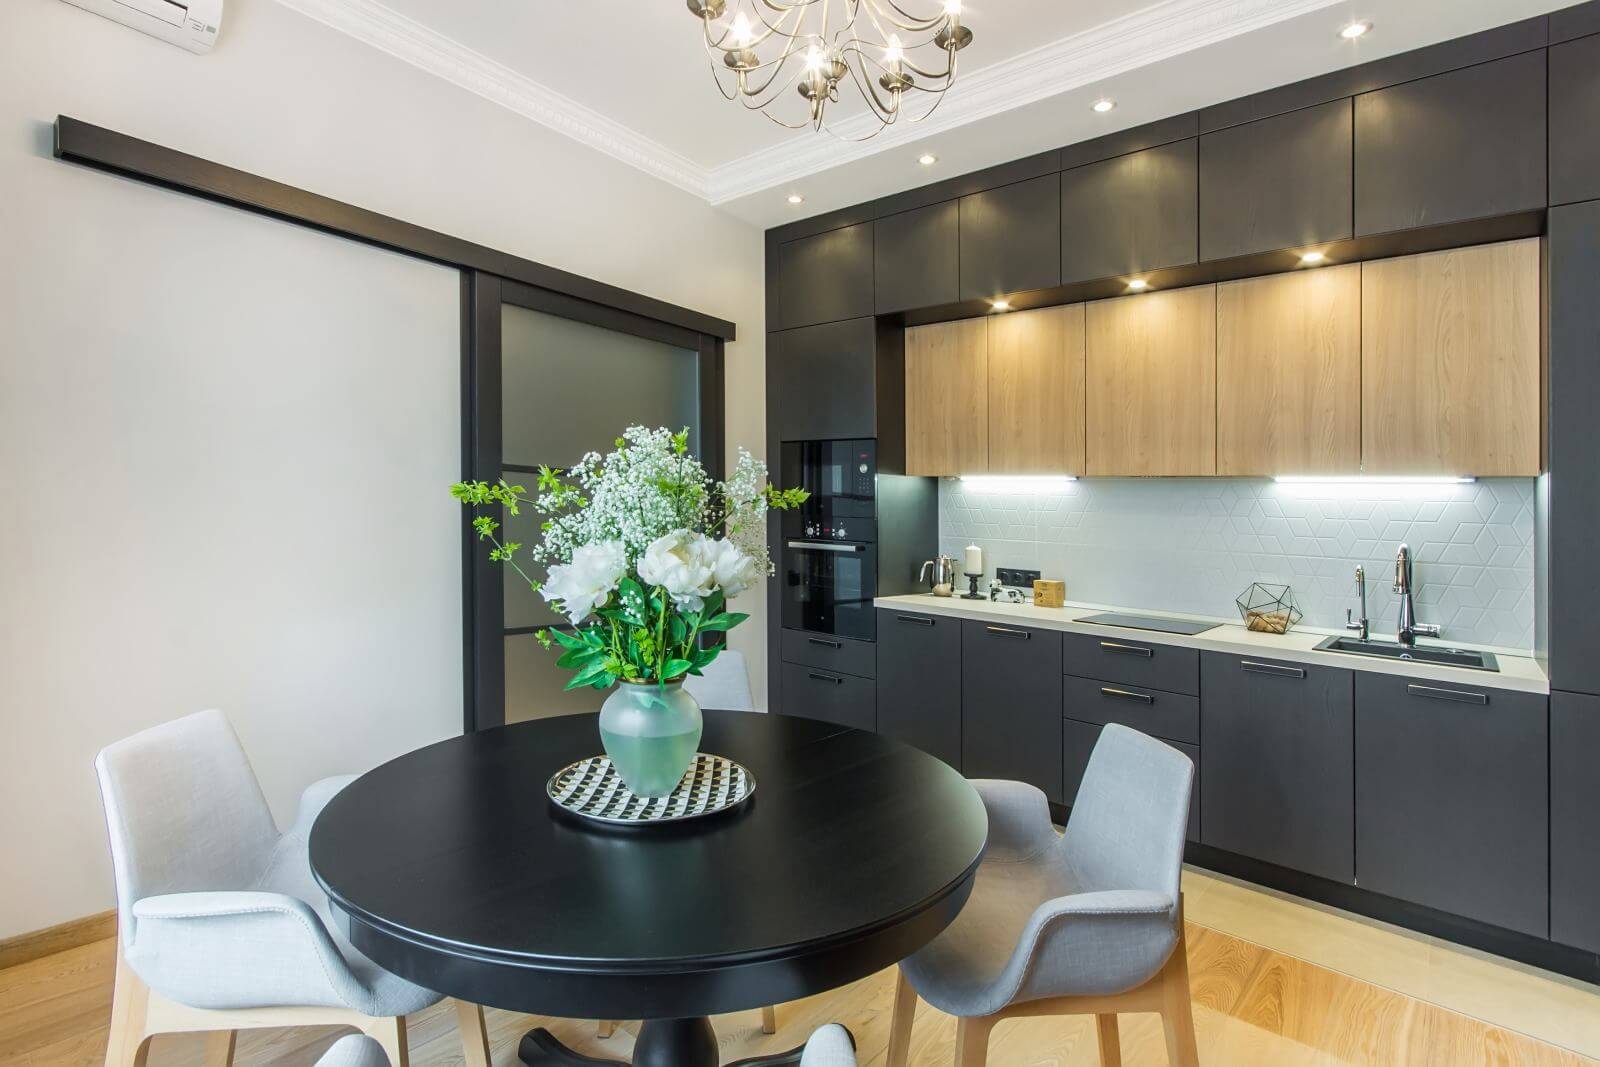 Beautiful kitchen in contemporary apartment. Modern interior with round breakfast table with flowers and sliding door